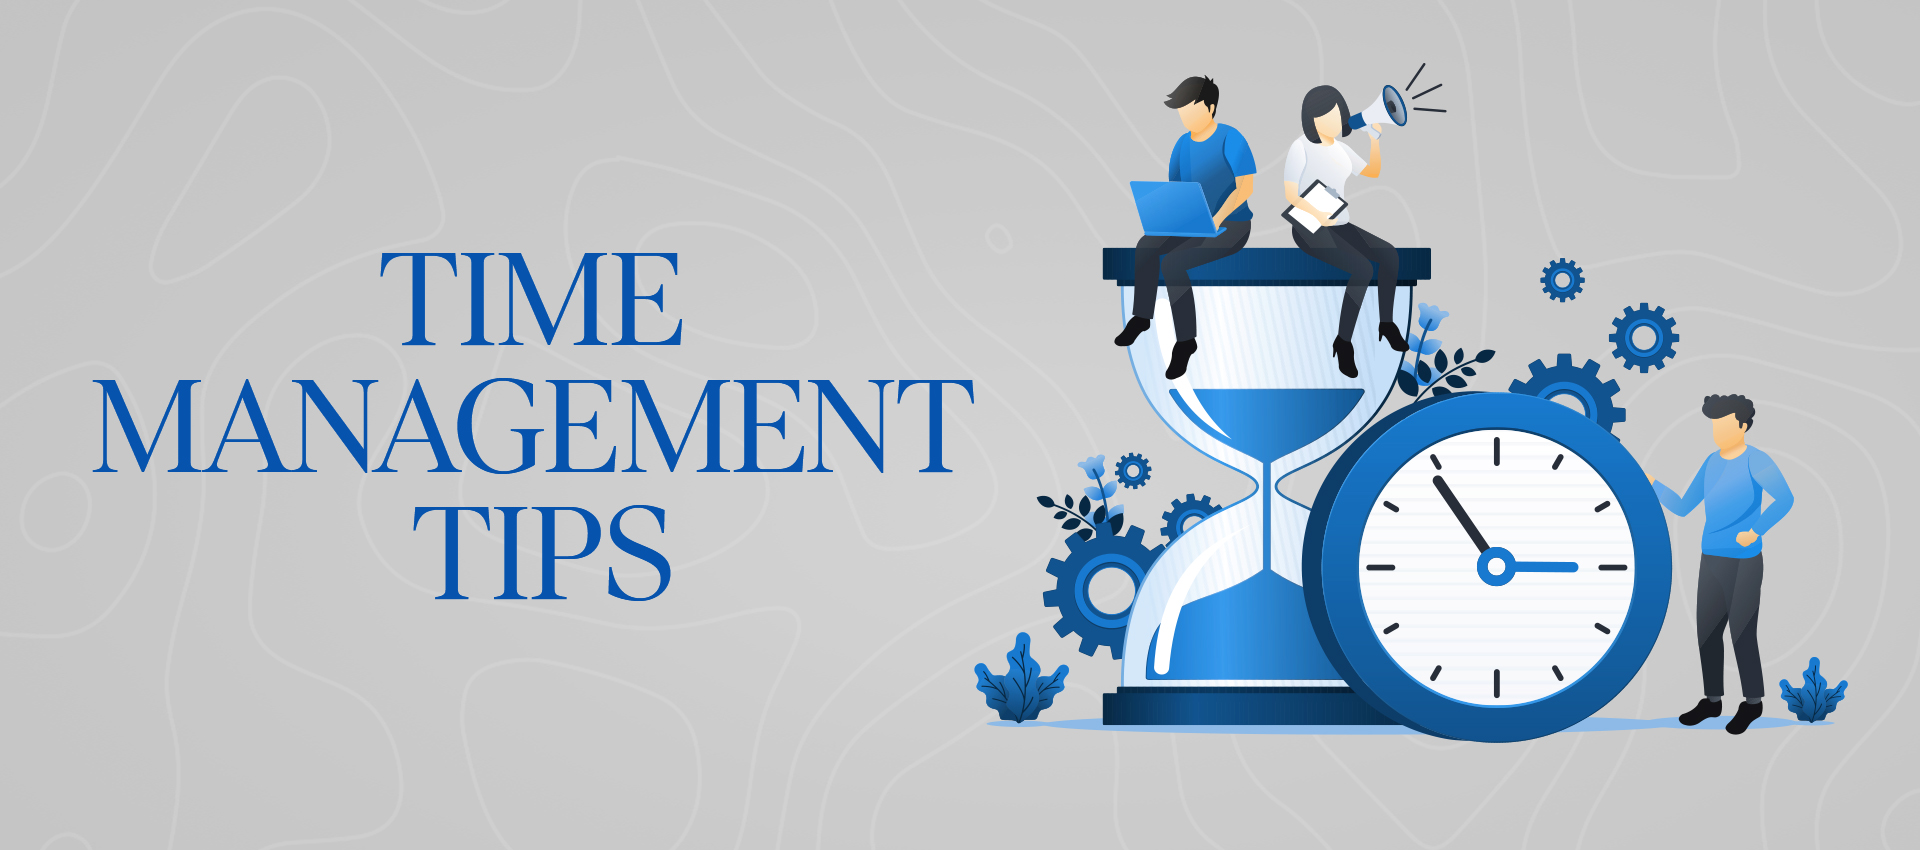 Time Management Tips for UPSC Exam Preparation